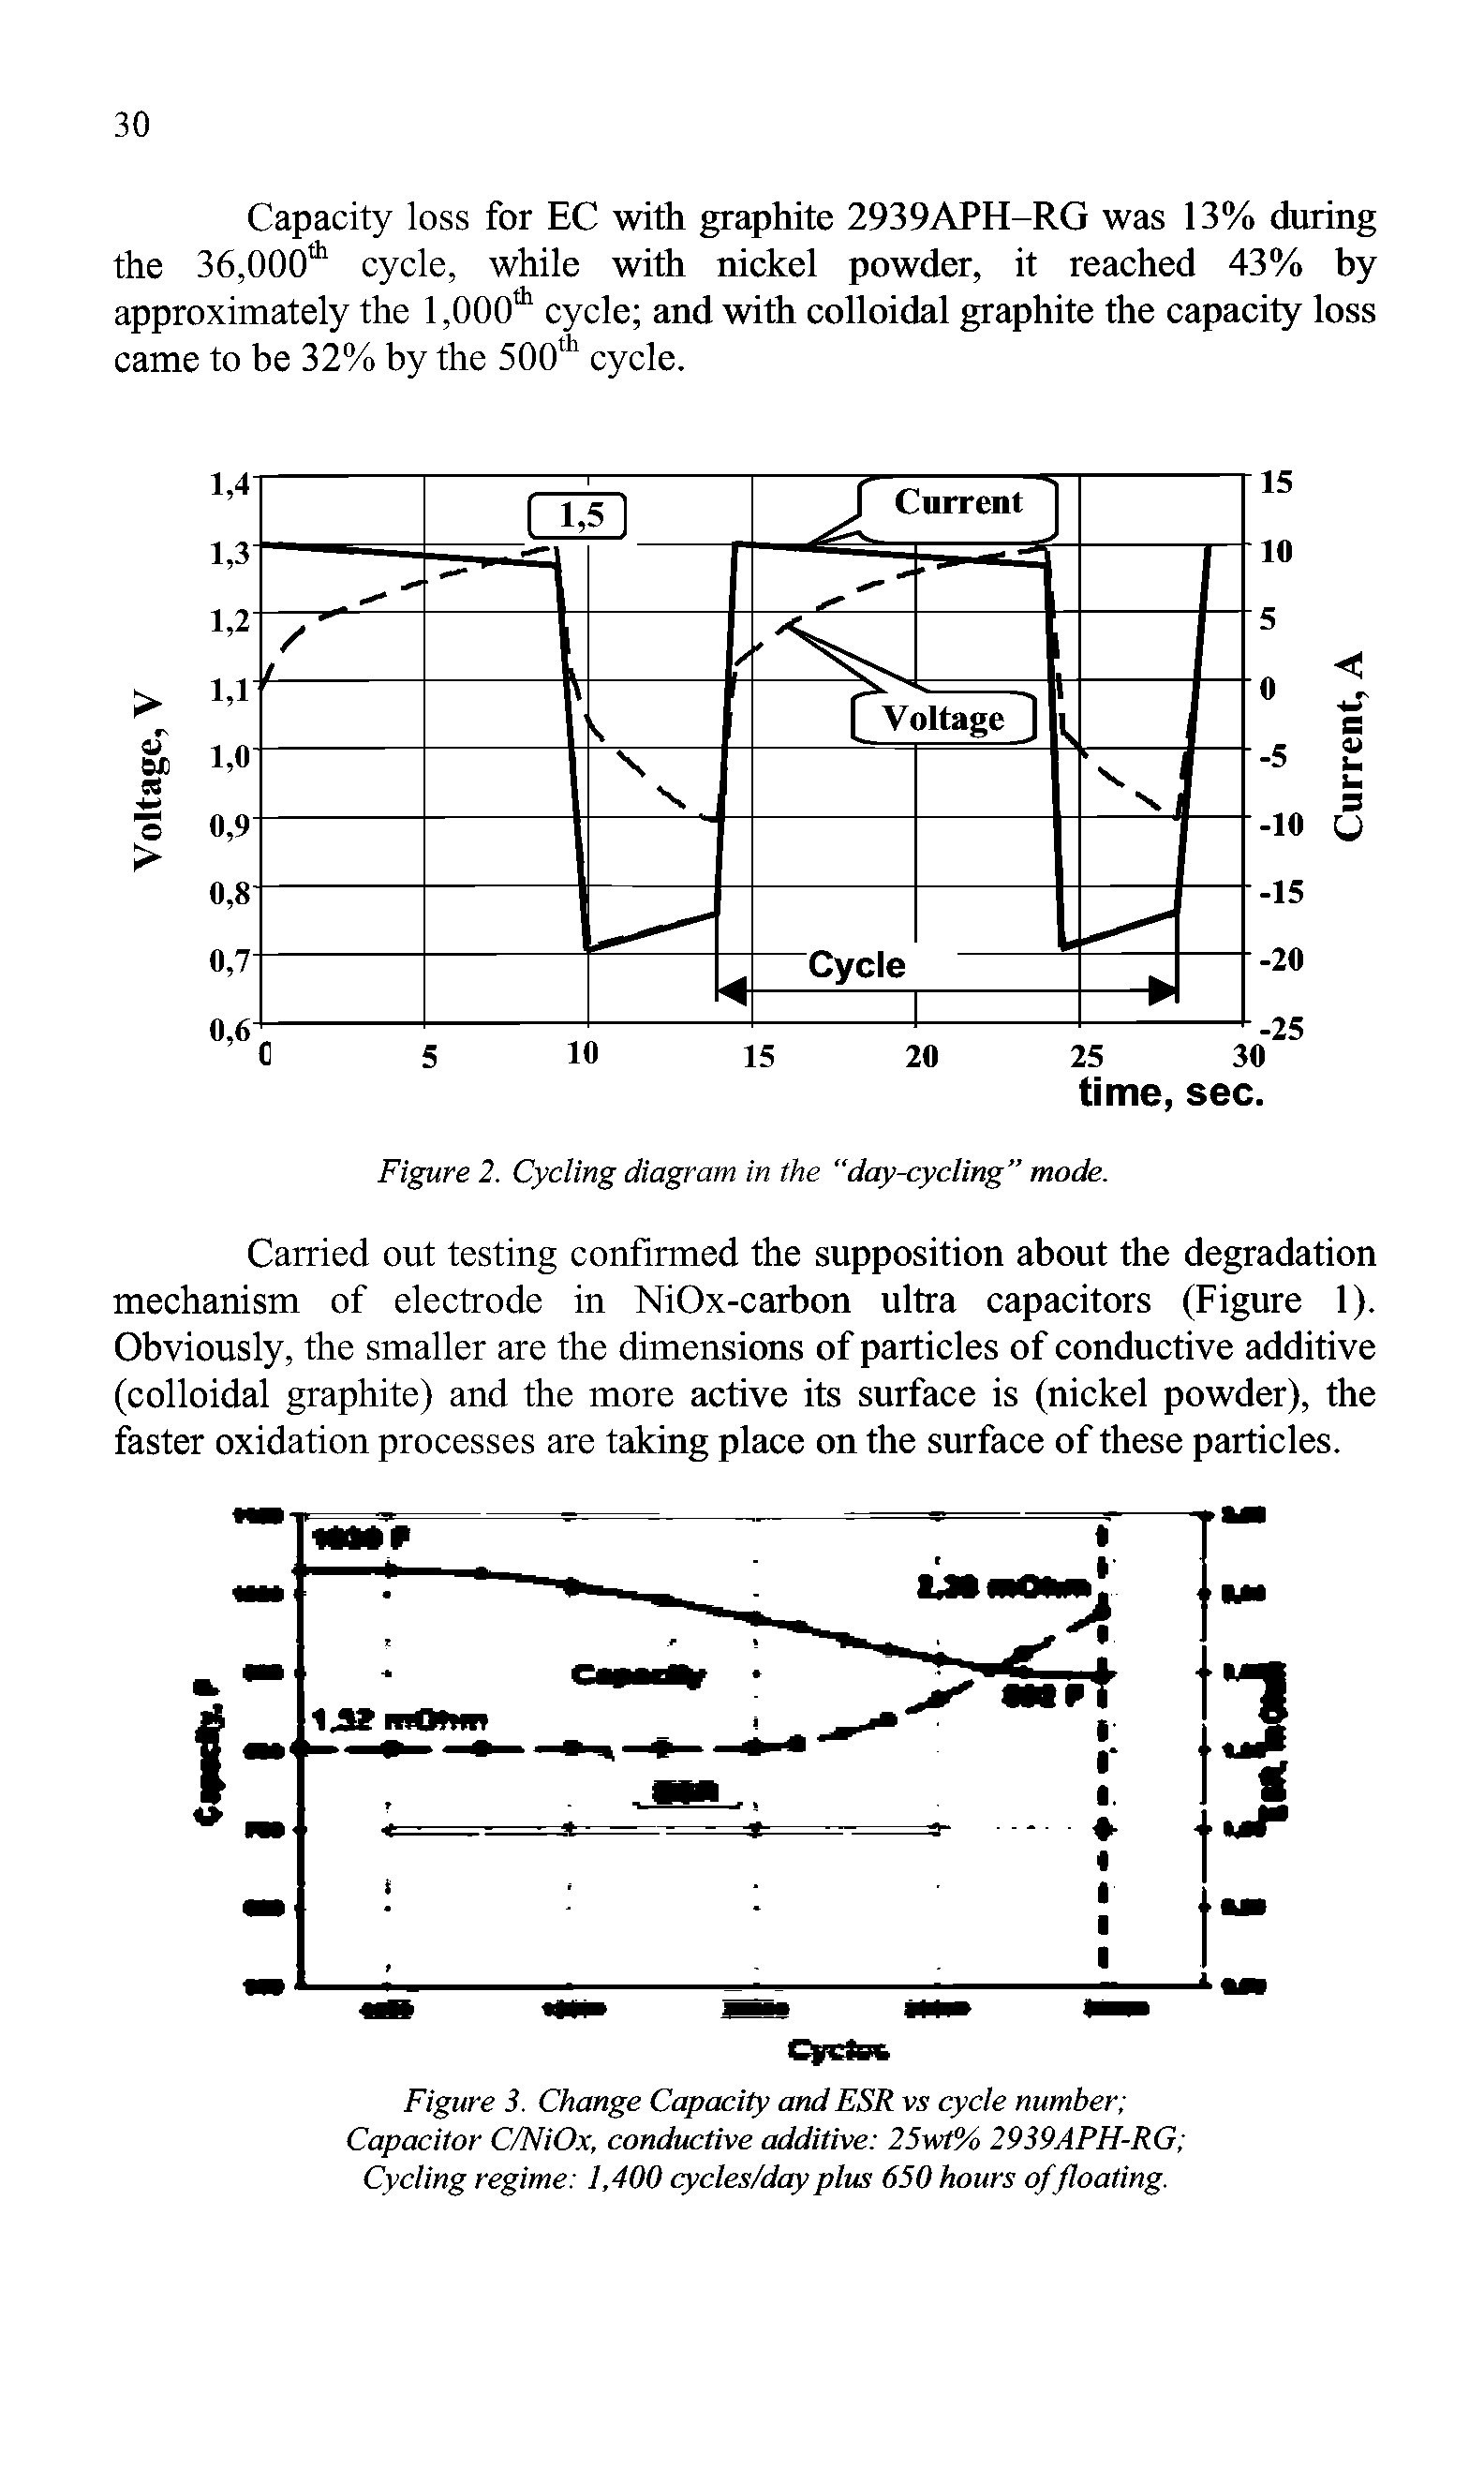 Figure 3. Change Capacity and ESR vs cycle number Capacitor C/NiOx, conductive additive 25wt% 2939APH-RG Cycling regime 1,400 cycles/day plus 650 hours of floating.